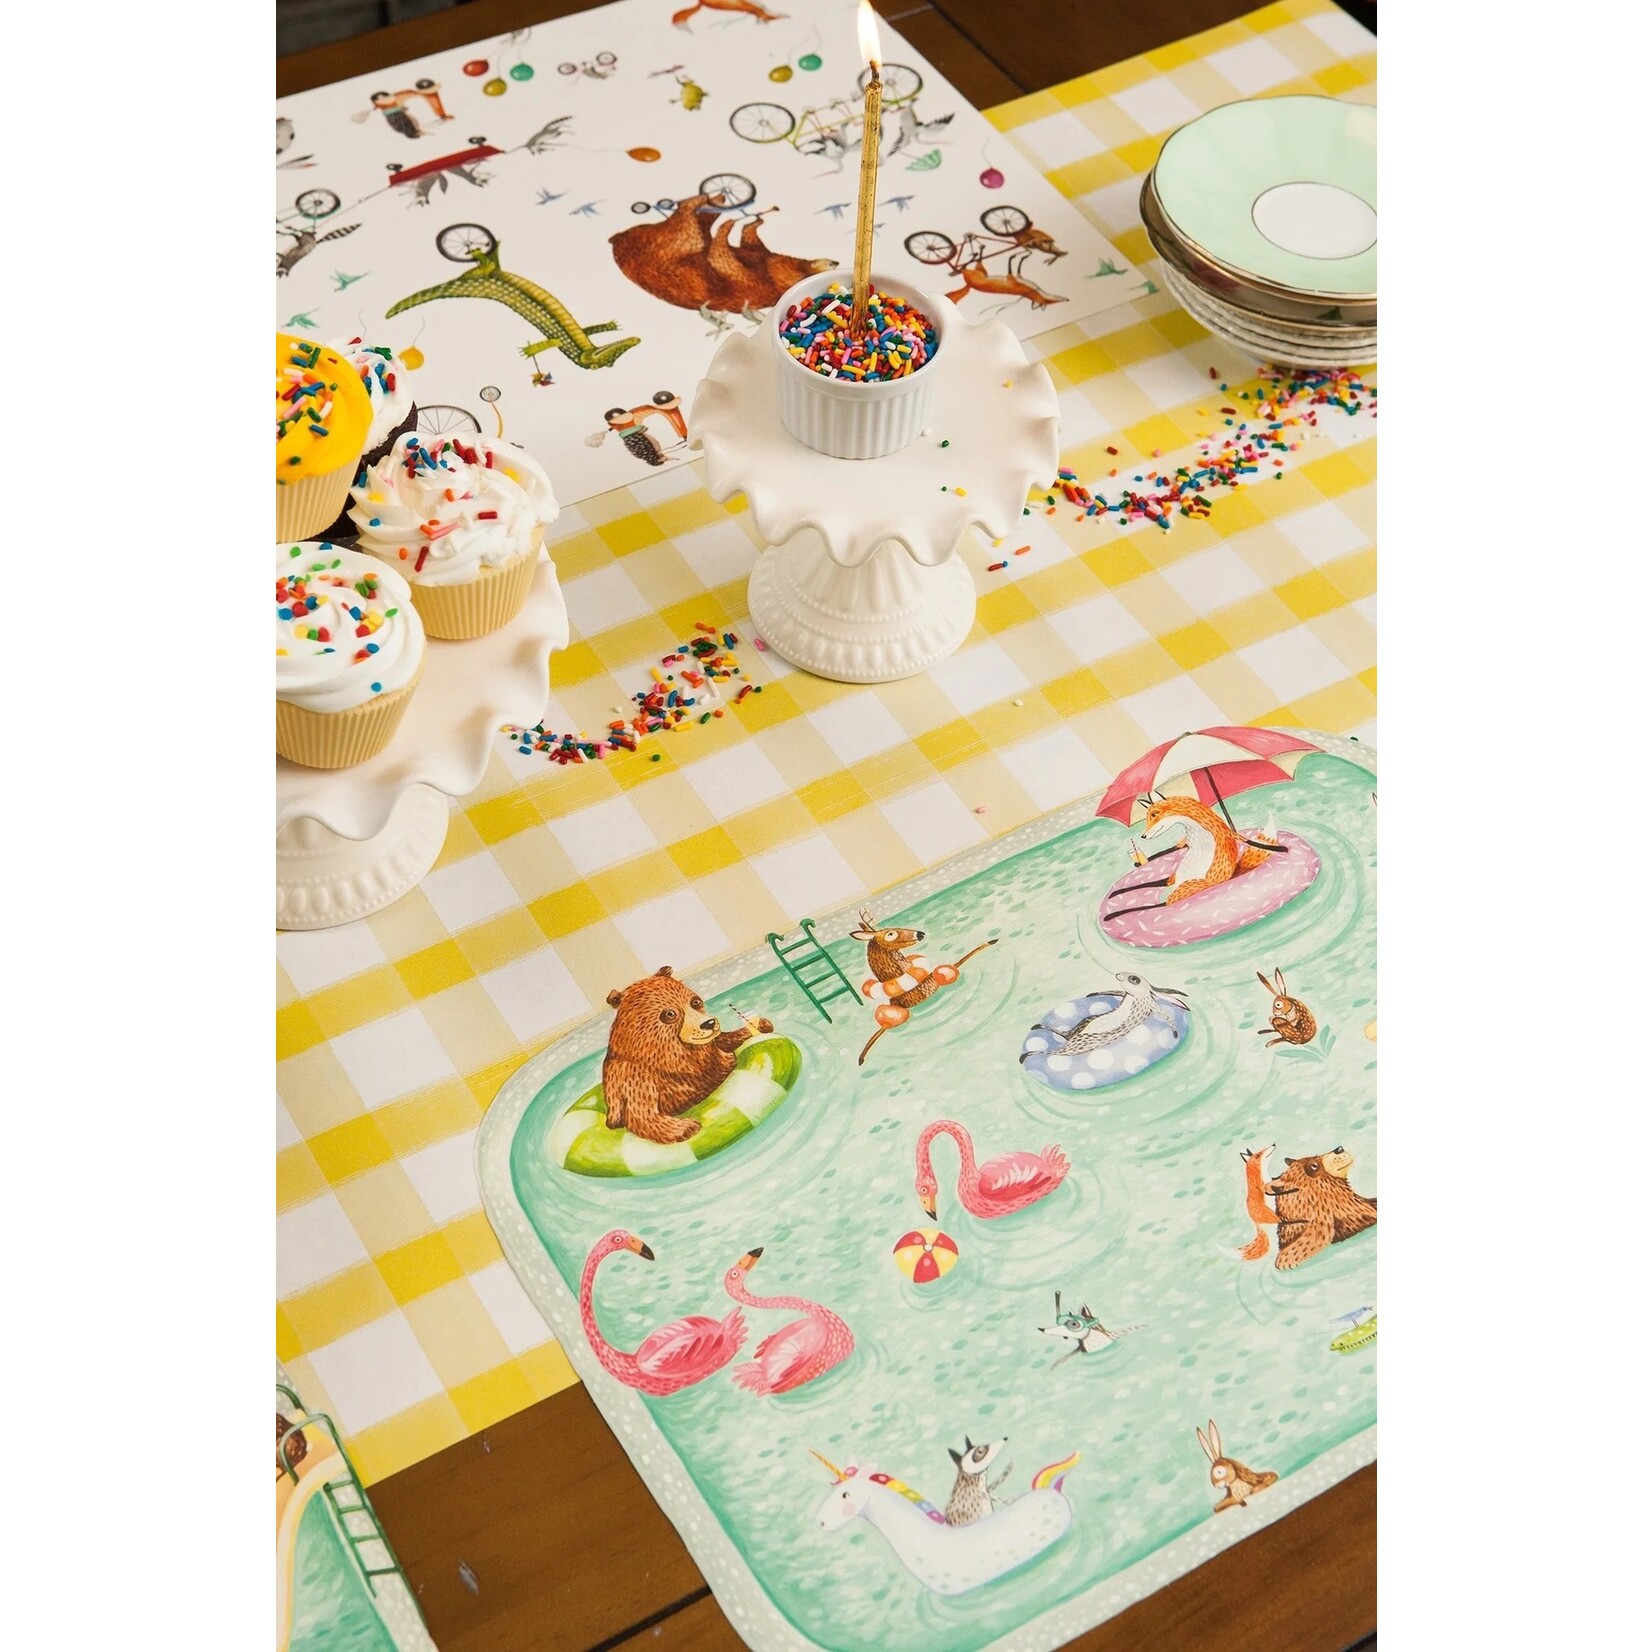 Hester & Cook Die Cut Pool Party Placemat